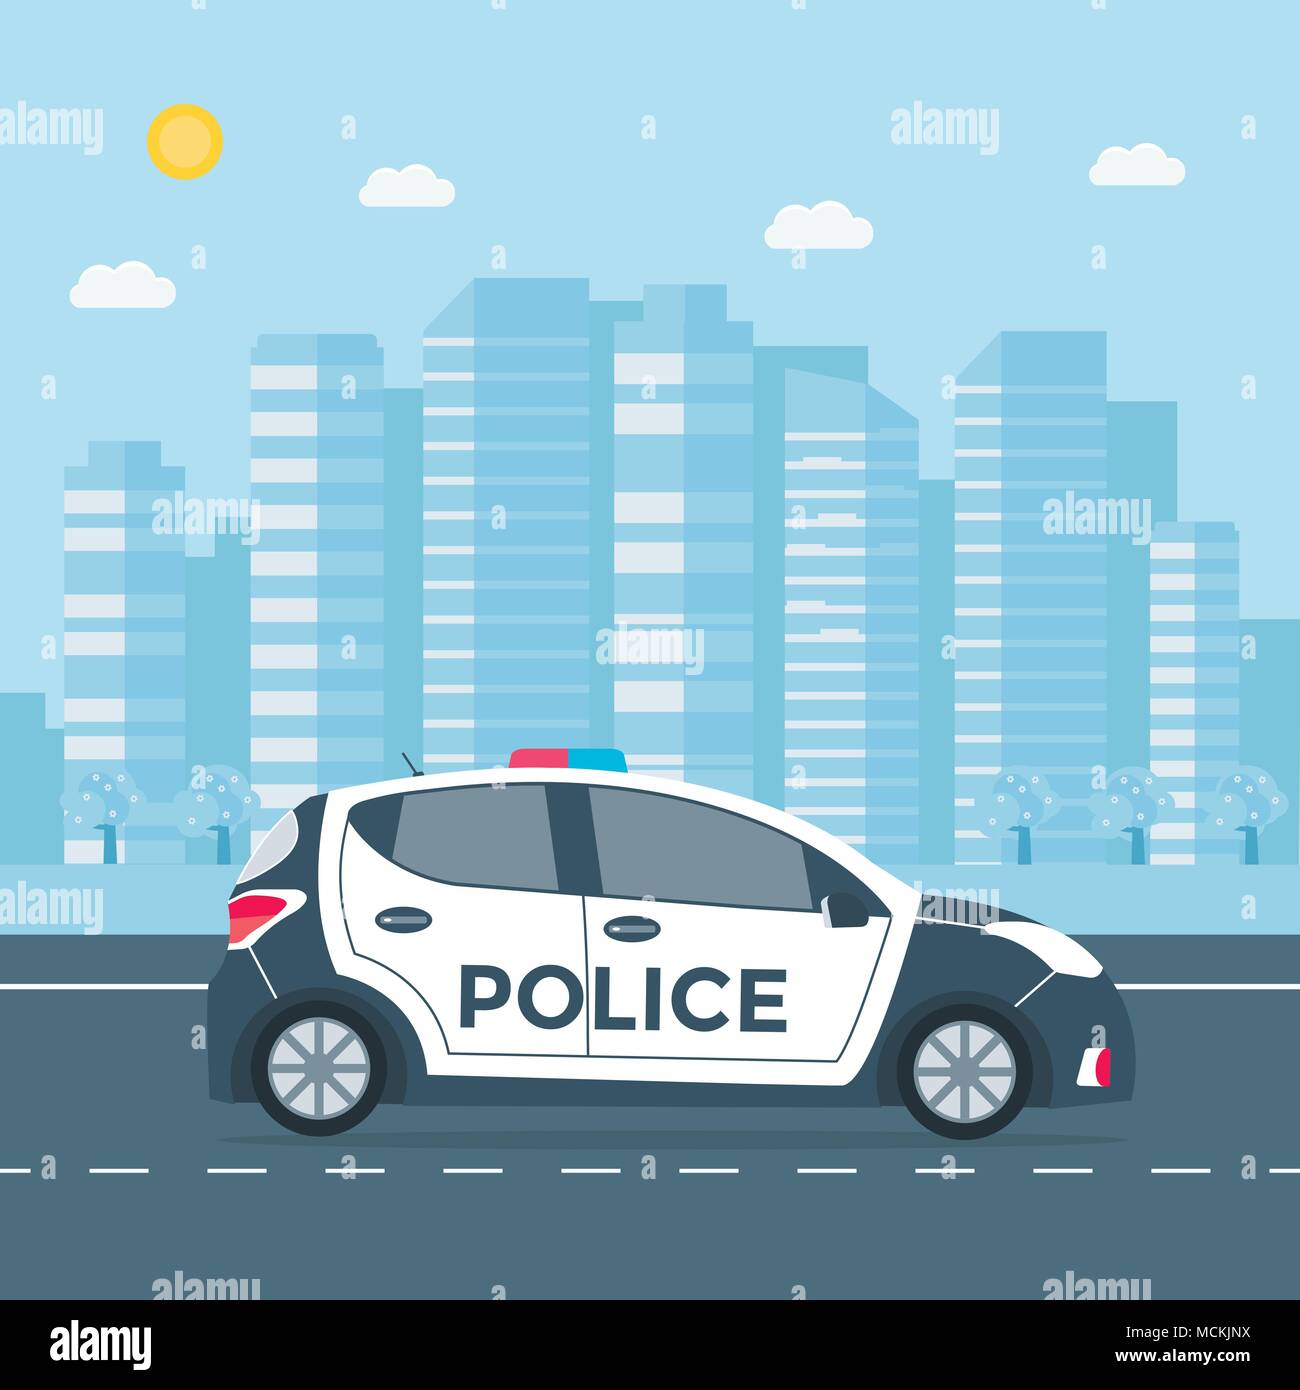 Police patrol on a road with police car, house, nature landscape. vehicle with rooftop flashing lights. Flat vector illustration. Stock Vector